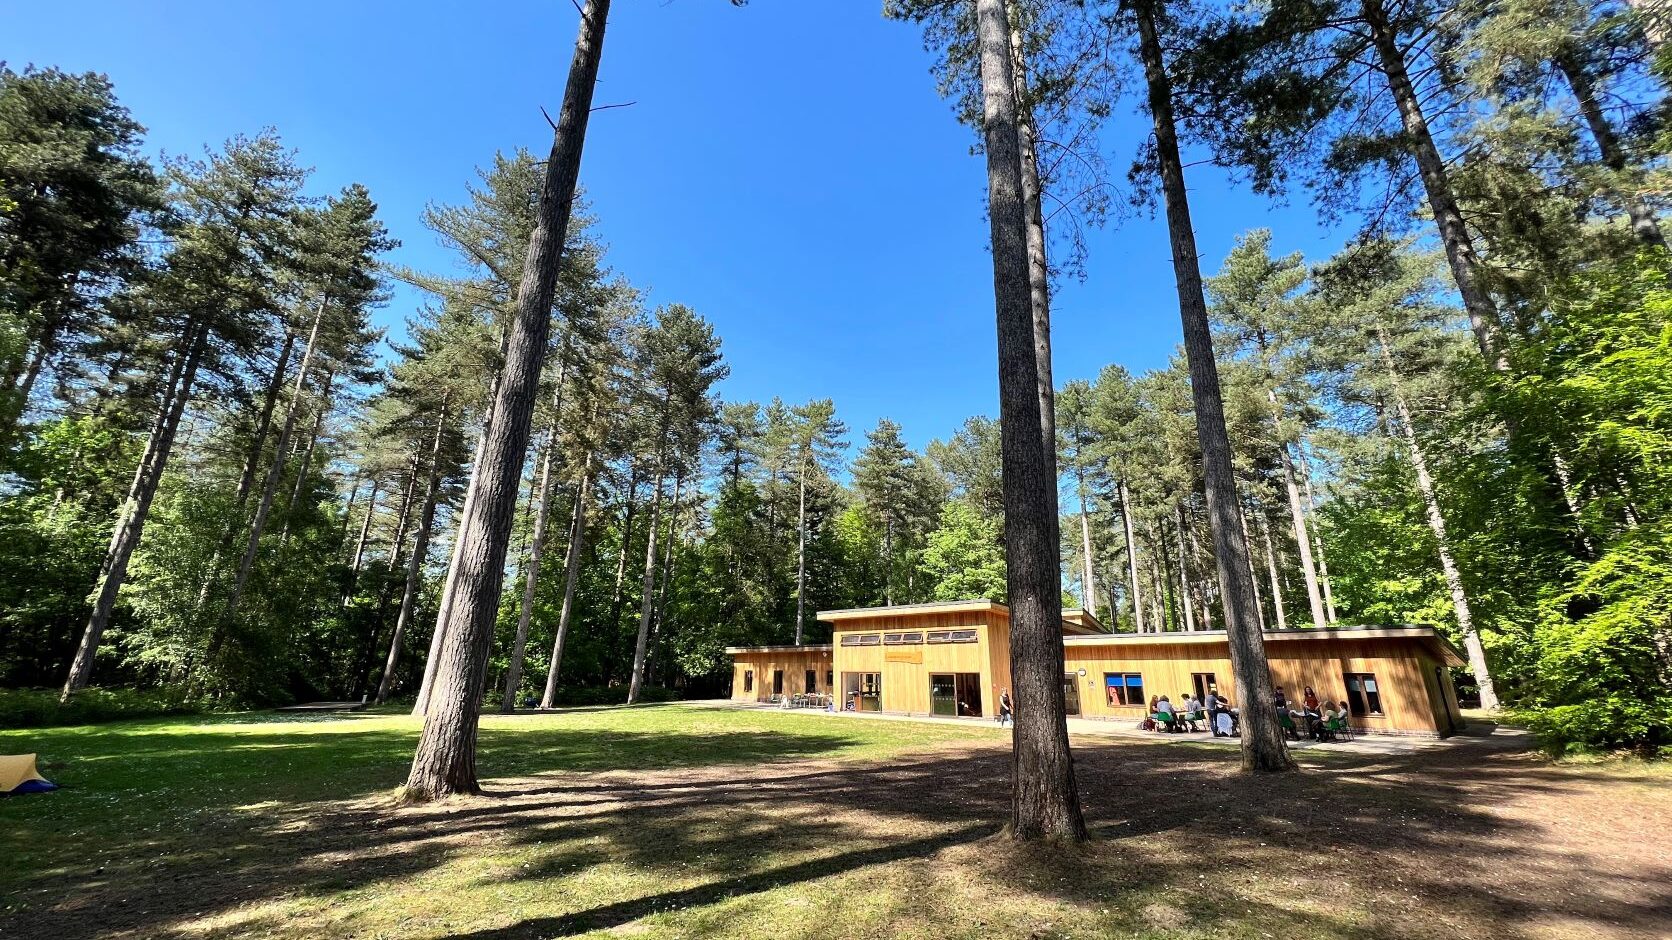 Thorpe Woodlands activity centre under blue skies and nestled amongst the trees